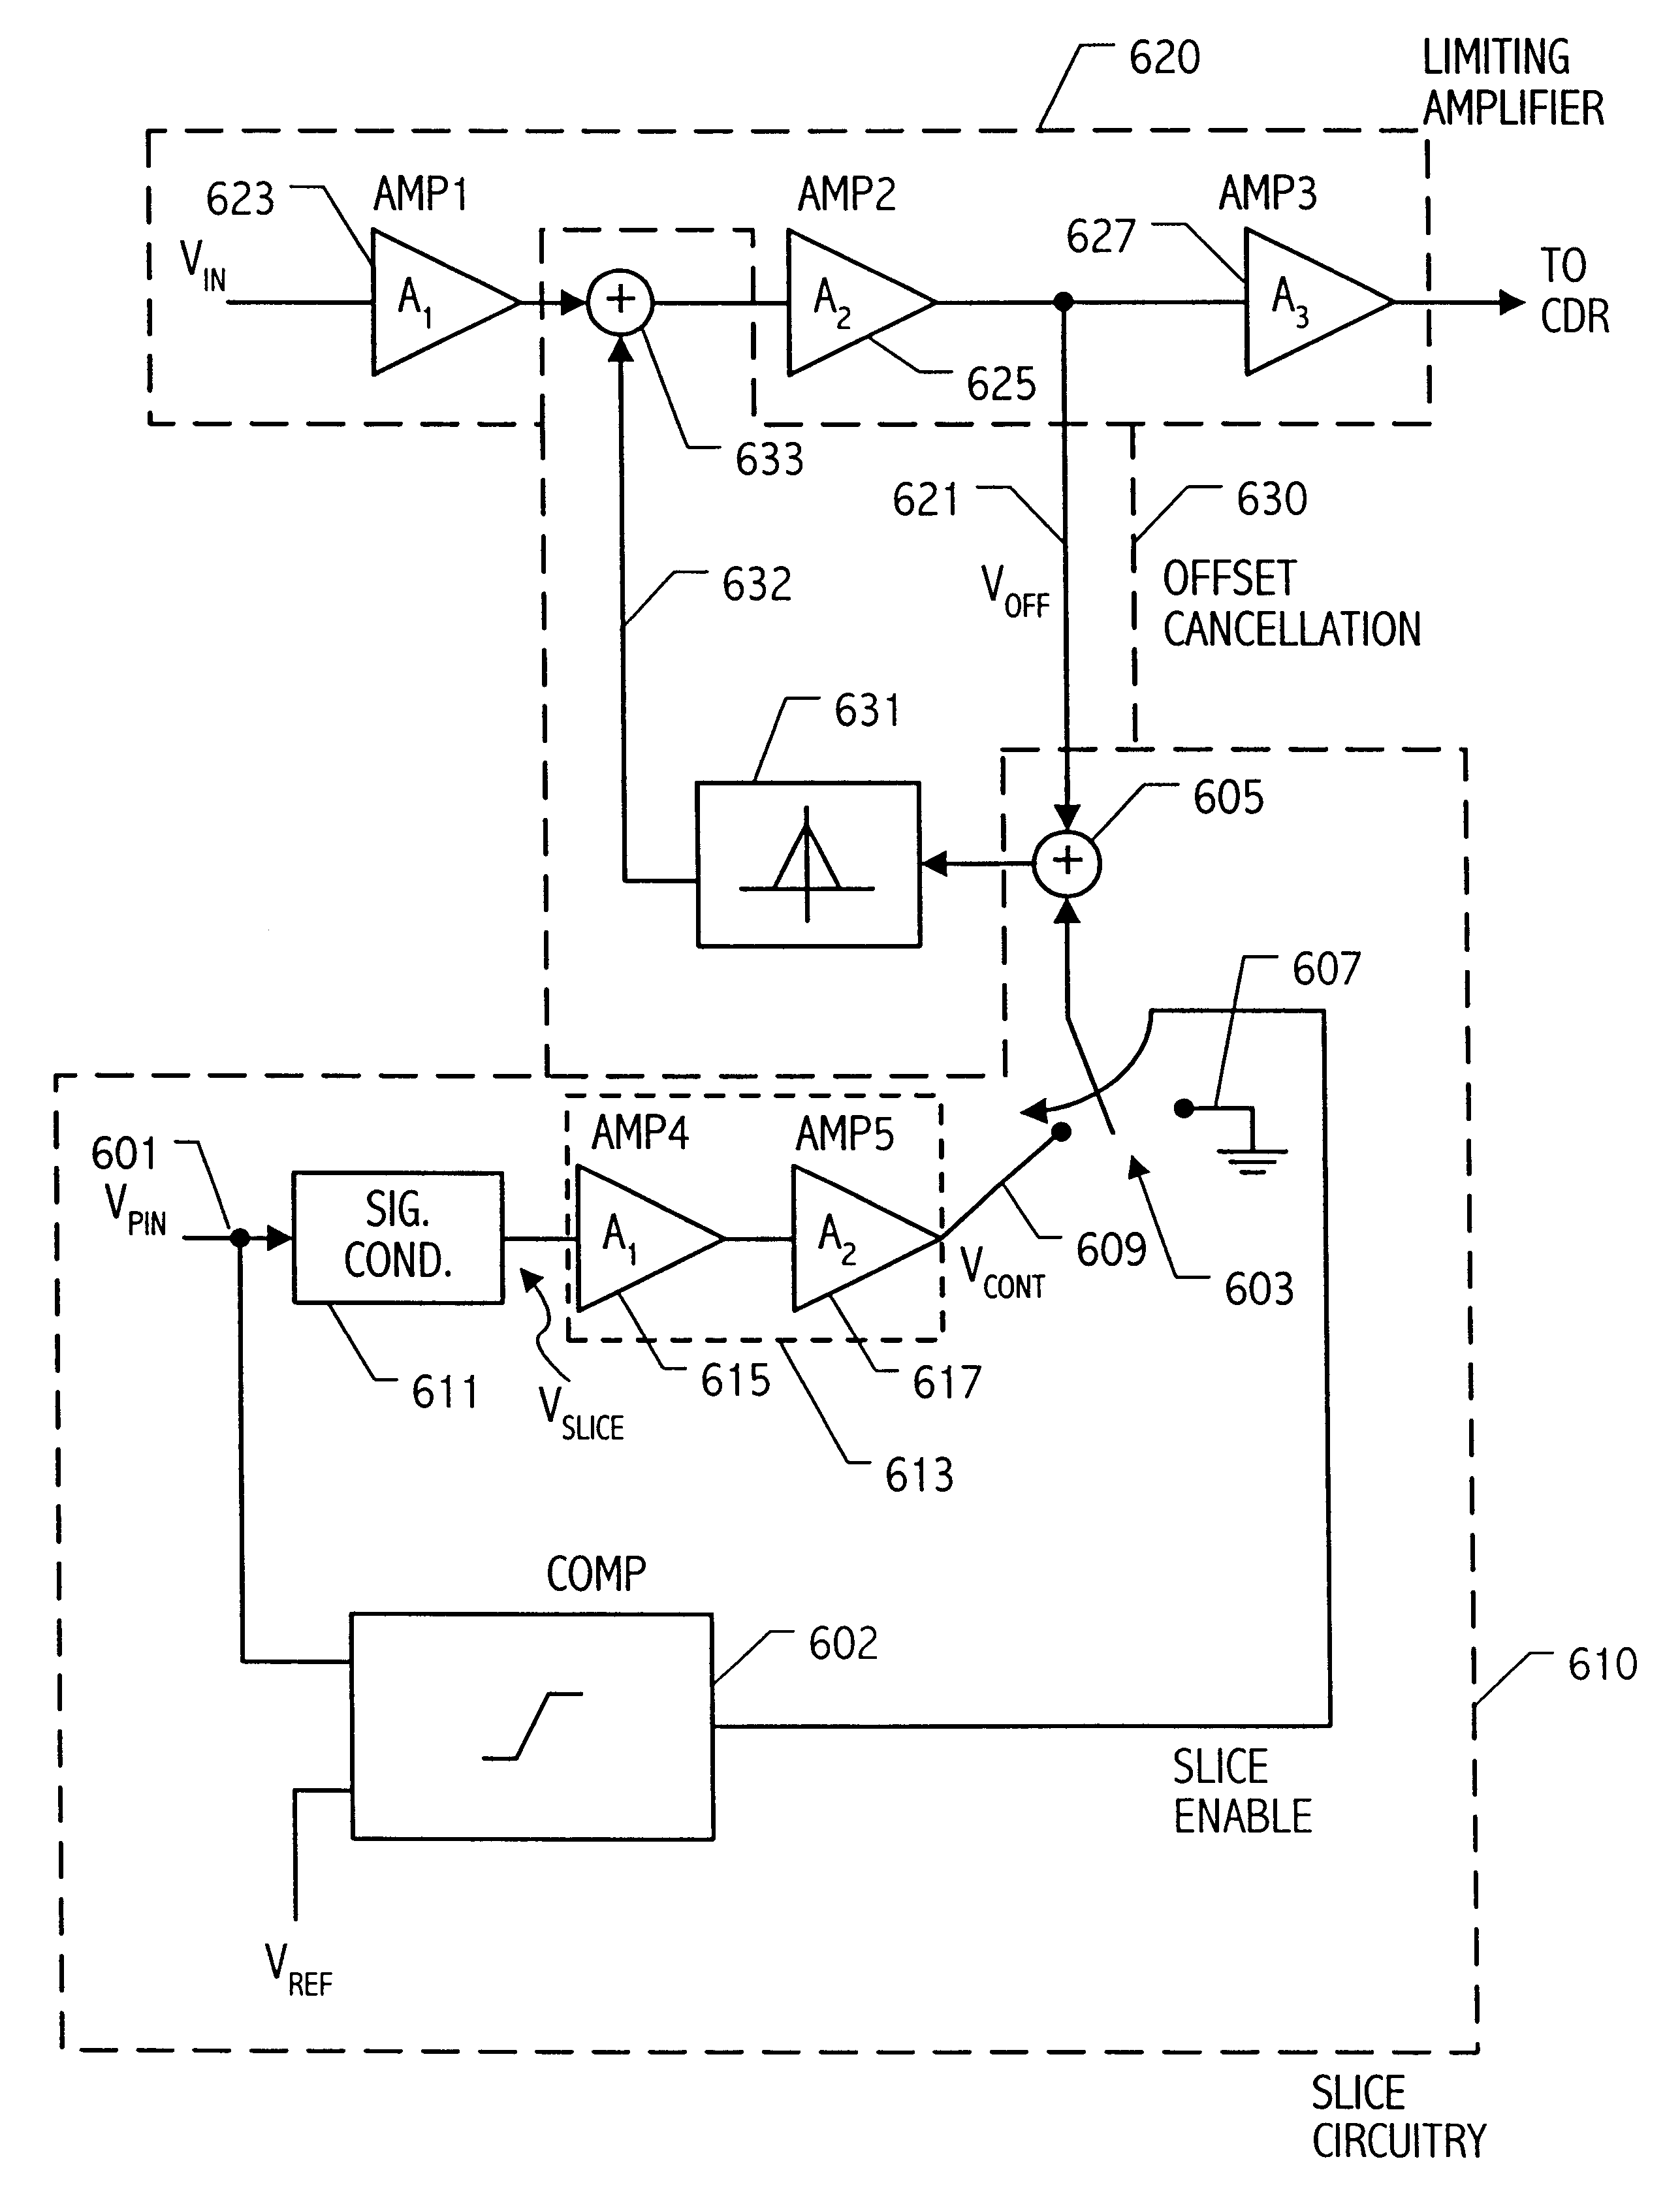 Offset correction and slicing level adjustment for amplifier circuits